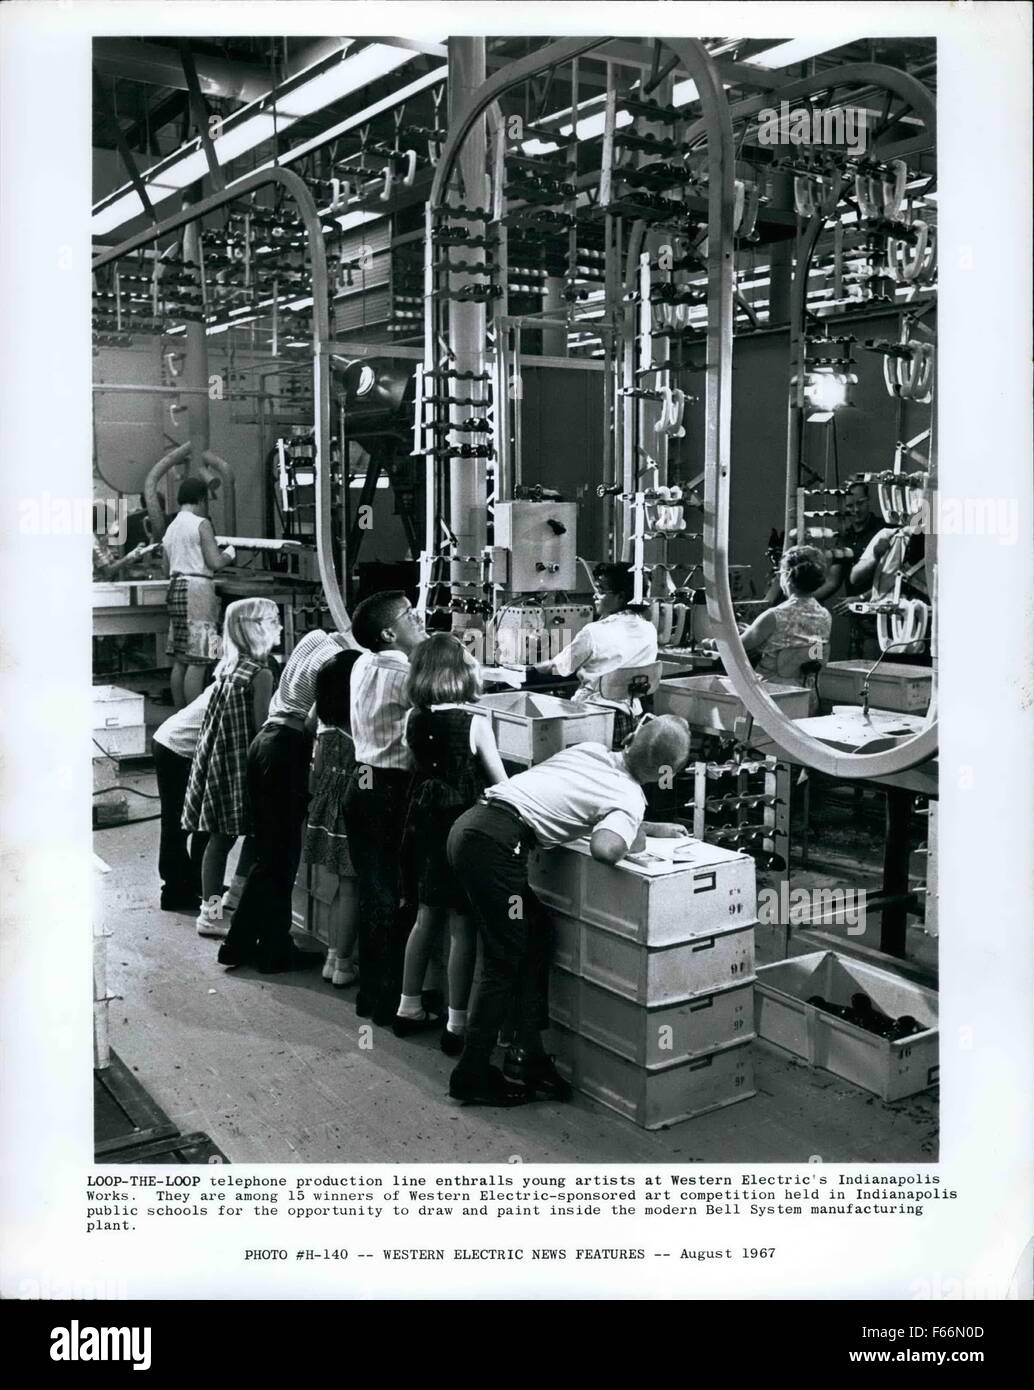 1962 - Loop-the-loop Telephone production line enthralls young artists at Western Electric Indianapolis Works. They are among the 15 winners of Western Electric sponsored art competition held in Indianapolis public schools for the opportunity to draw and paint inside the modern Bell System manufacturing plant. © Keystone Pictures USA/ZUMAPRESS.com/Alamy Live News Stock Photo